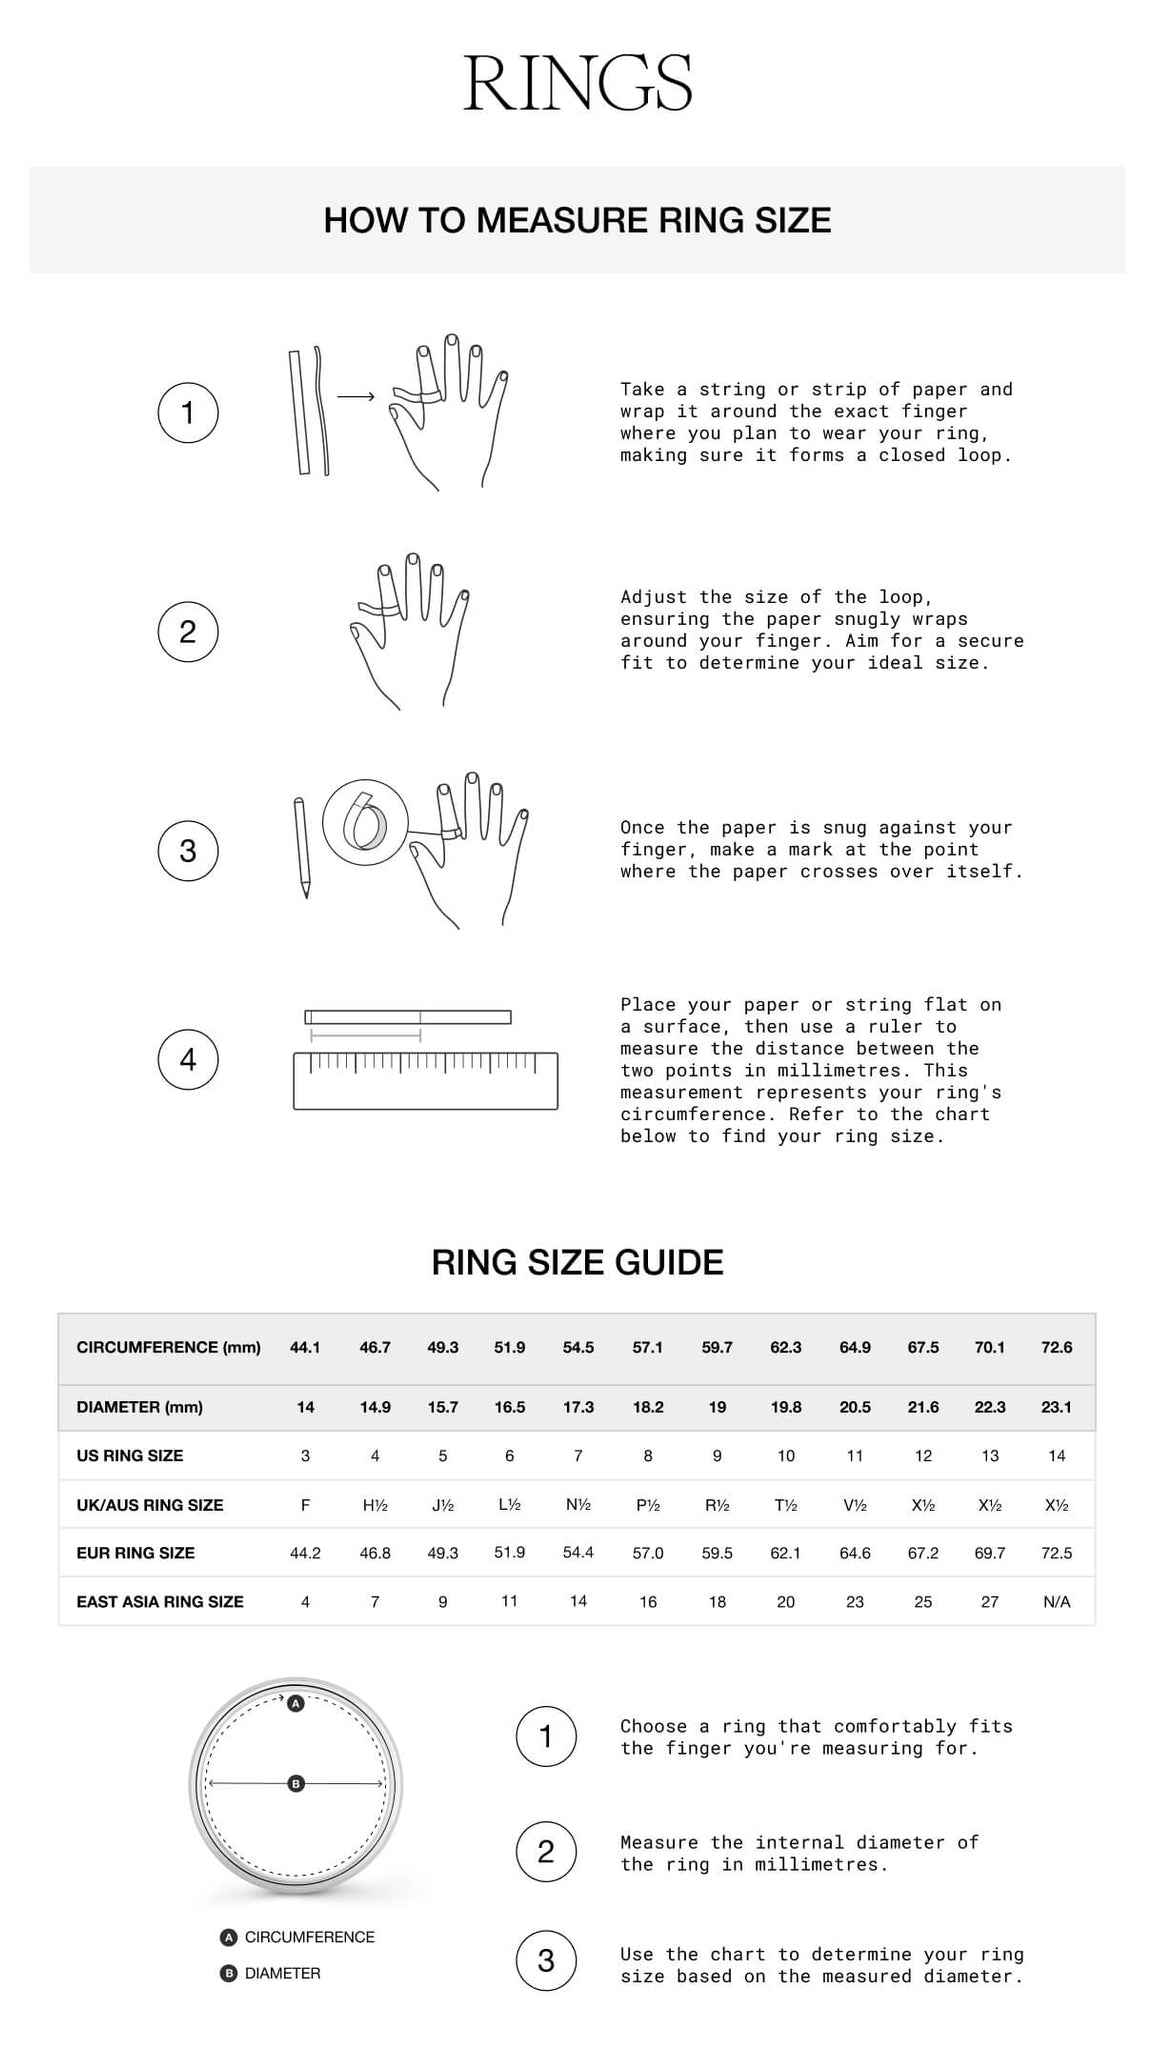 How To Measure Ring Size: Top Useful Tips From Experts